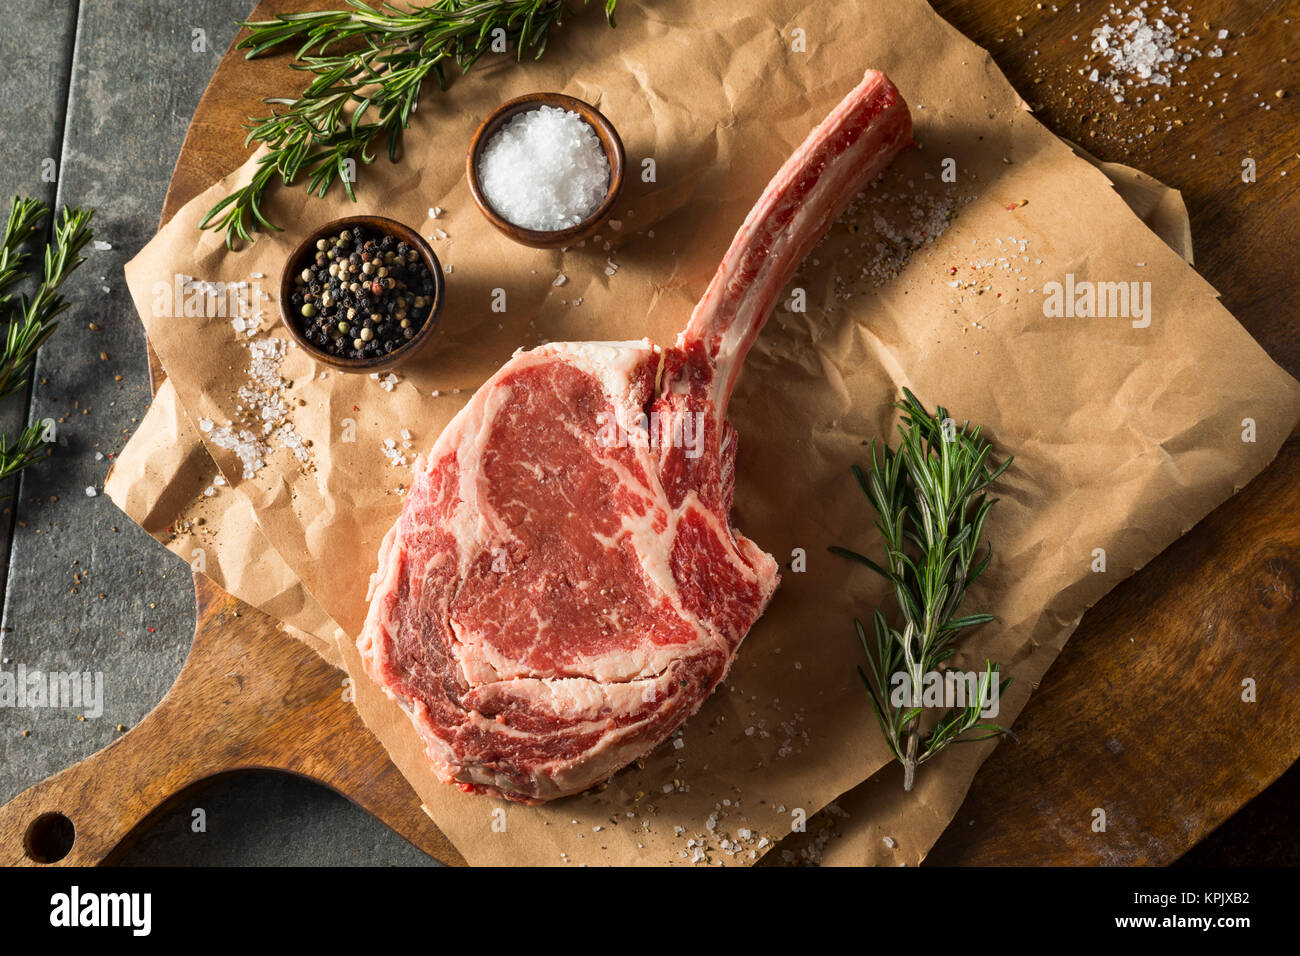 Raw Red Grass Fed Tomahawk Steaks with Rosemary Stock Photo